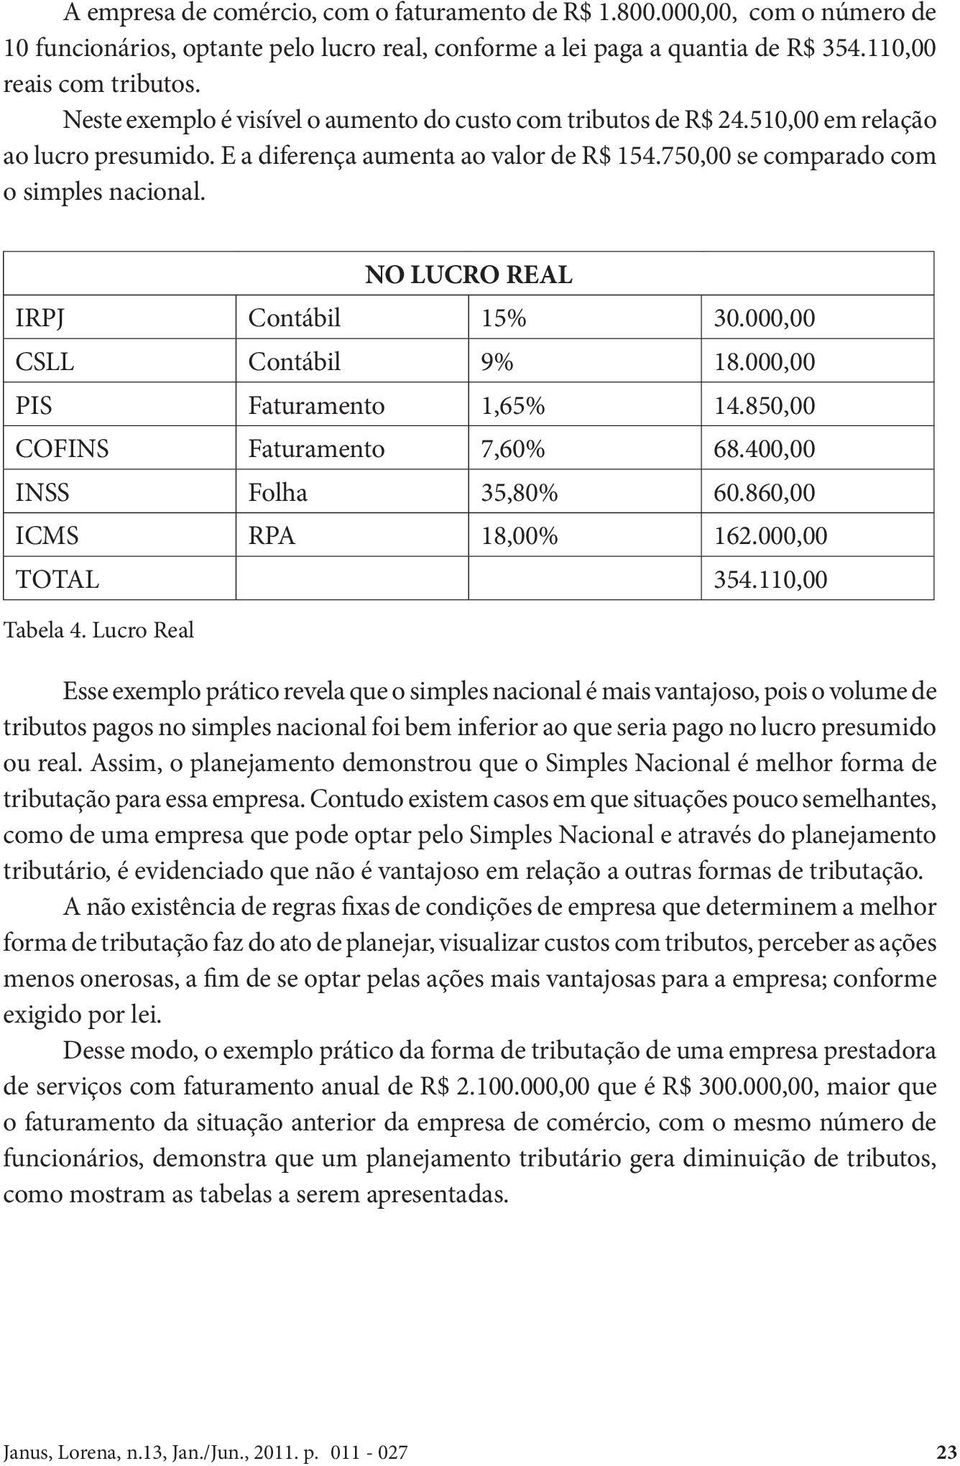 Lucro Real NO LUCRO REAL IRPJ Contábil 15% 30.000,00 CSLL Contábil 9% 18.000,00 PIS Faturamento 1,65% 14.850,00 COFINS Faturamento 7,60% 68.400,00 INSS Folha 35,80% 60.860,00 ICMS RPA 18,00% 162.